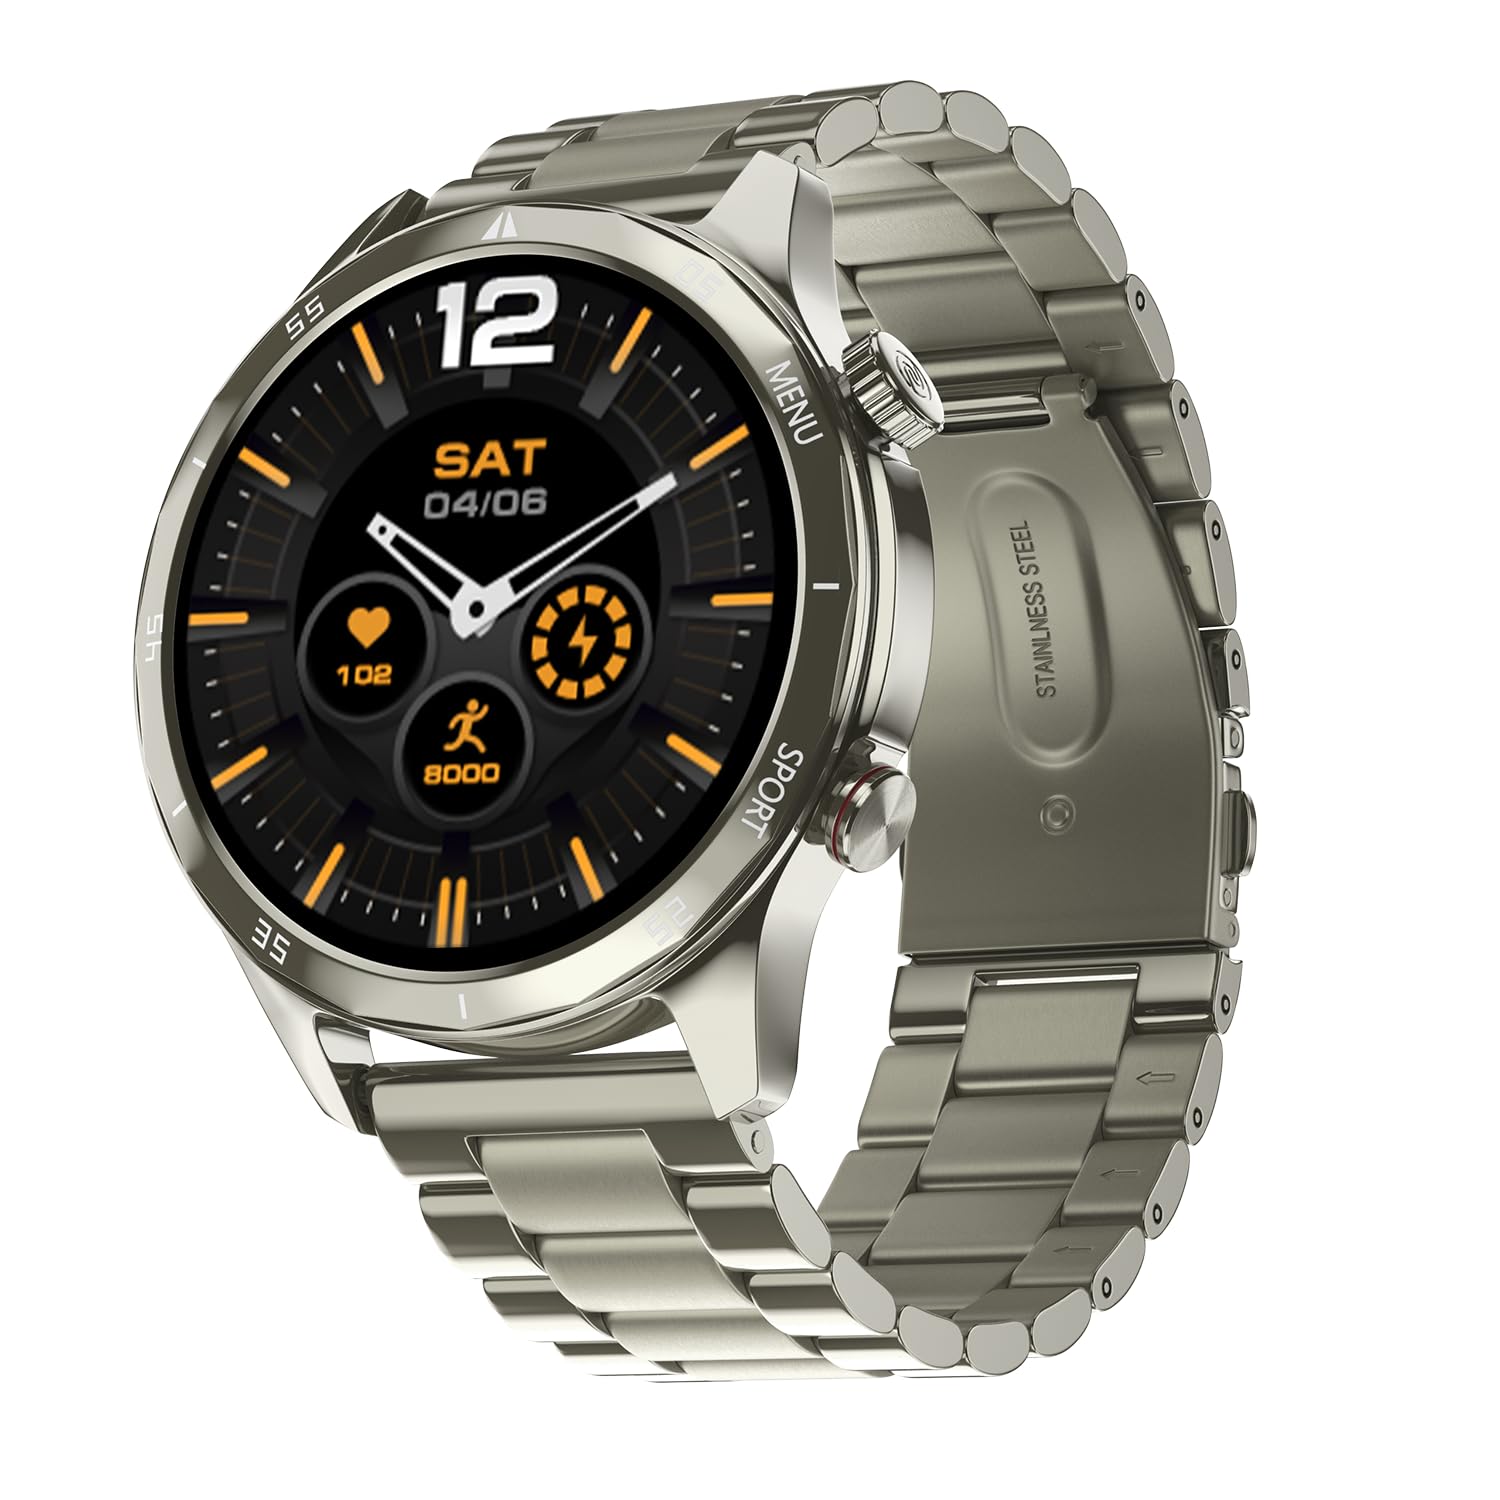 Noise Newly Launched Mettalix: 1.4" HD Display with Metallic Straps and Stainless Steel Finish, BT Calling, Functional Crown, 7 Day Battery, Smart Watch for Men and Women (Elite Nickel) - Blossom Mantra